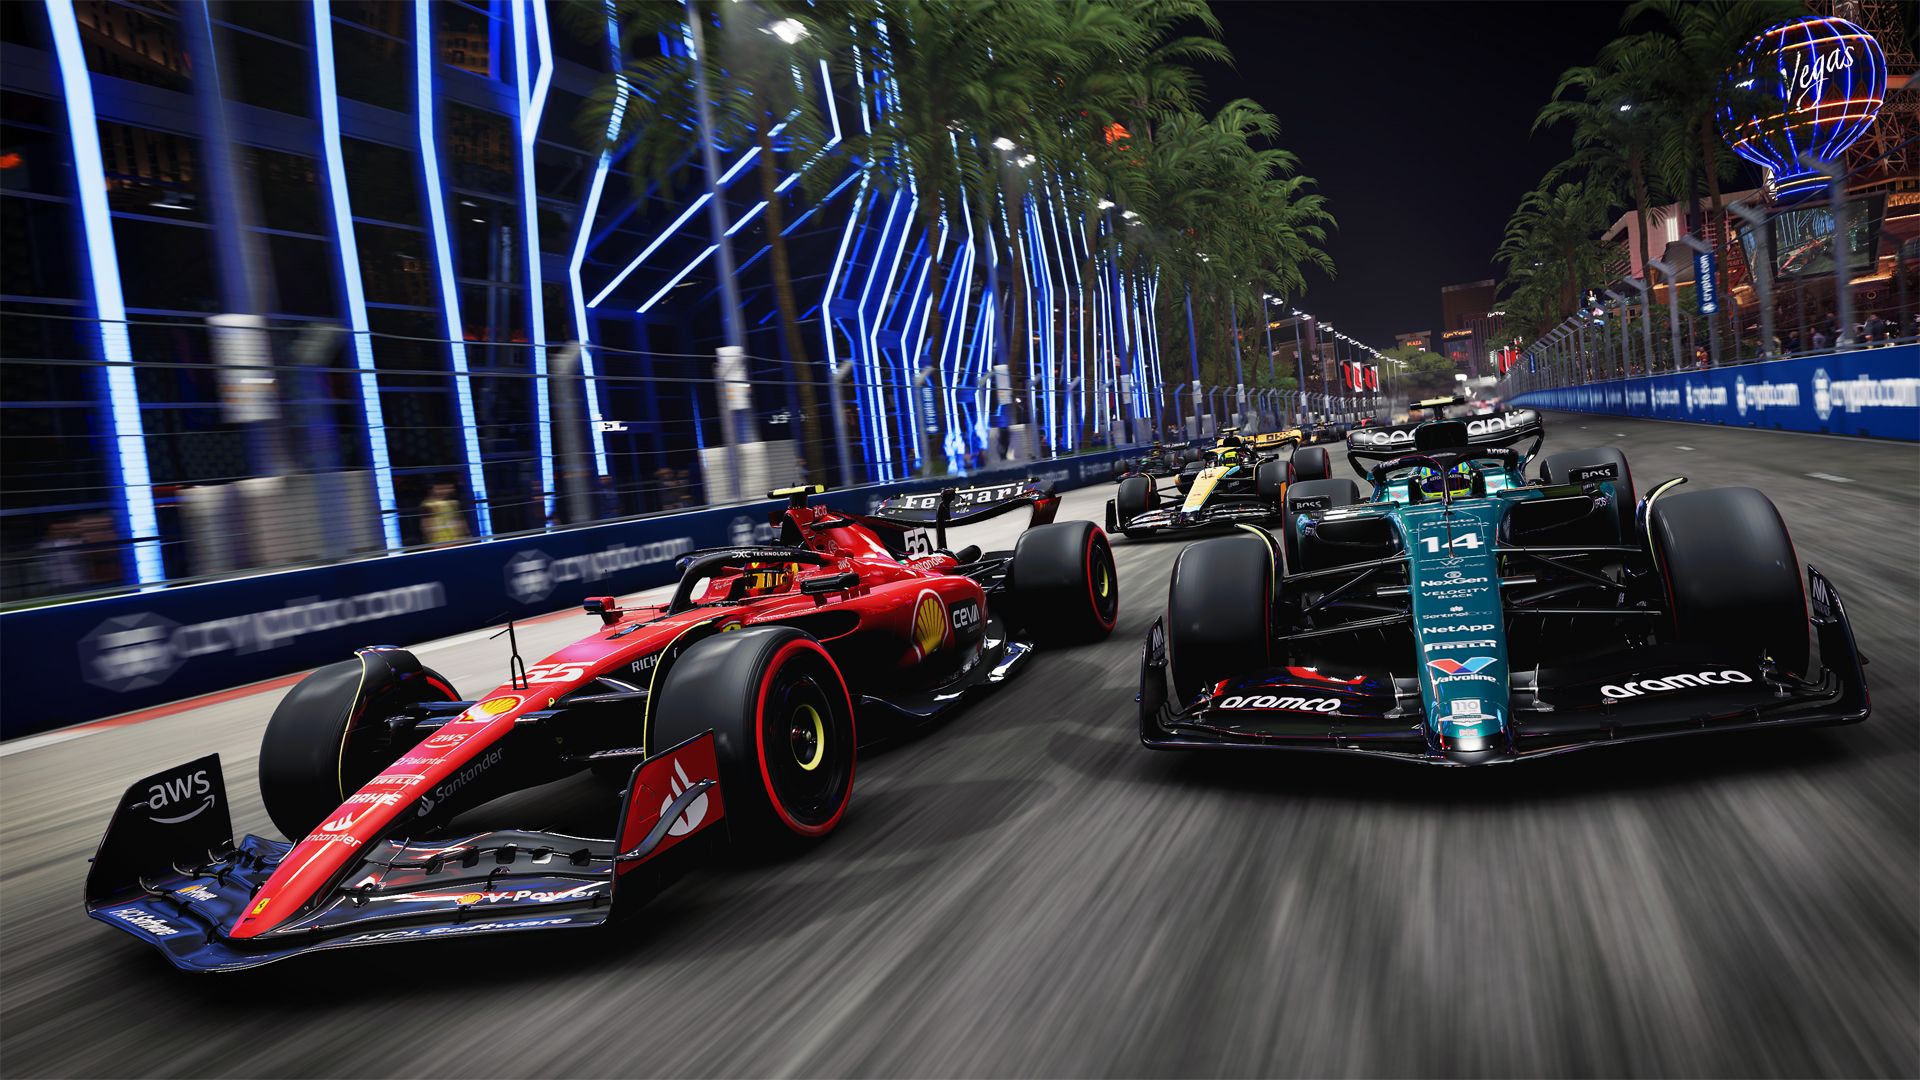 F1 23 Free Play Weekend: How to play F1 23 for free